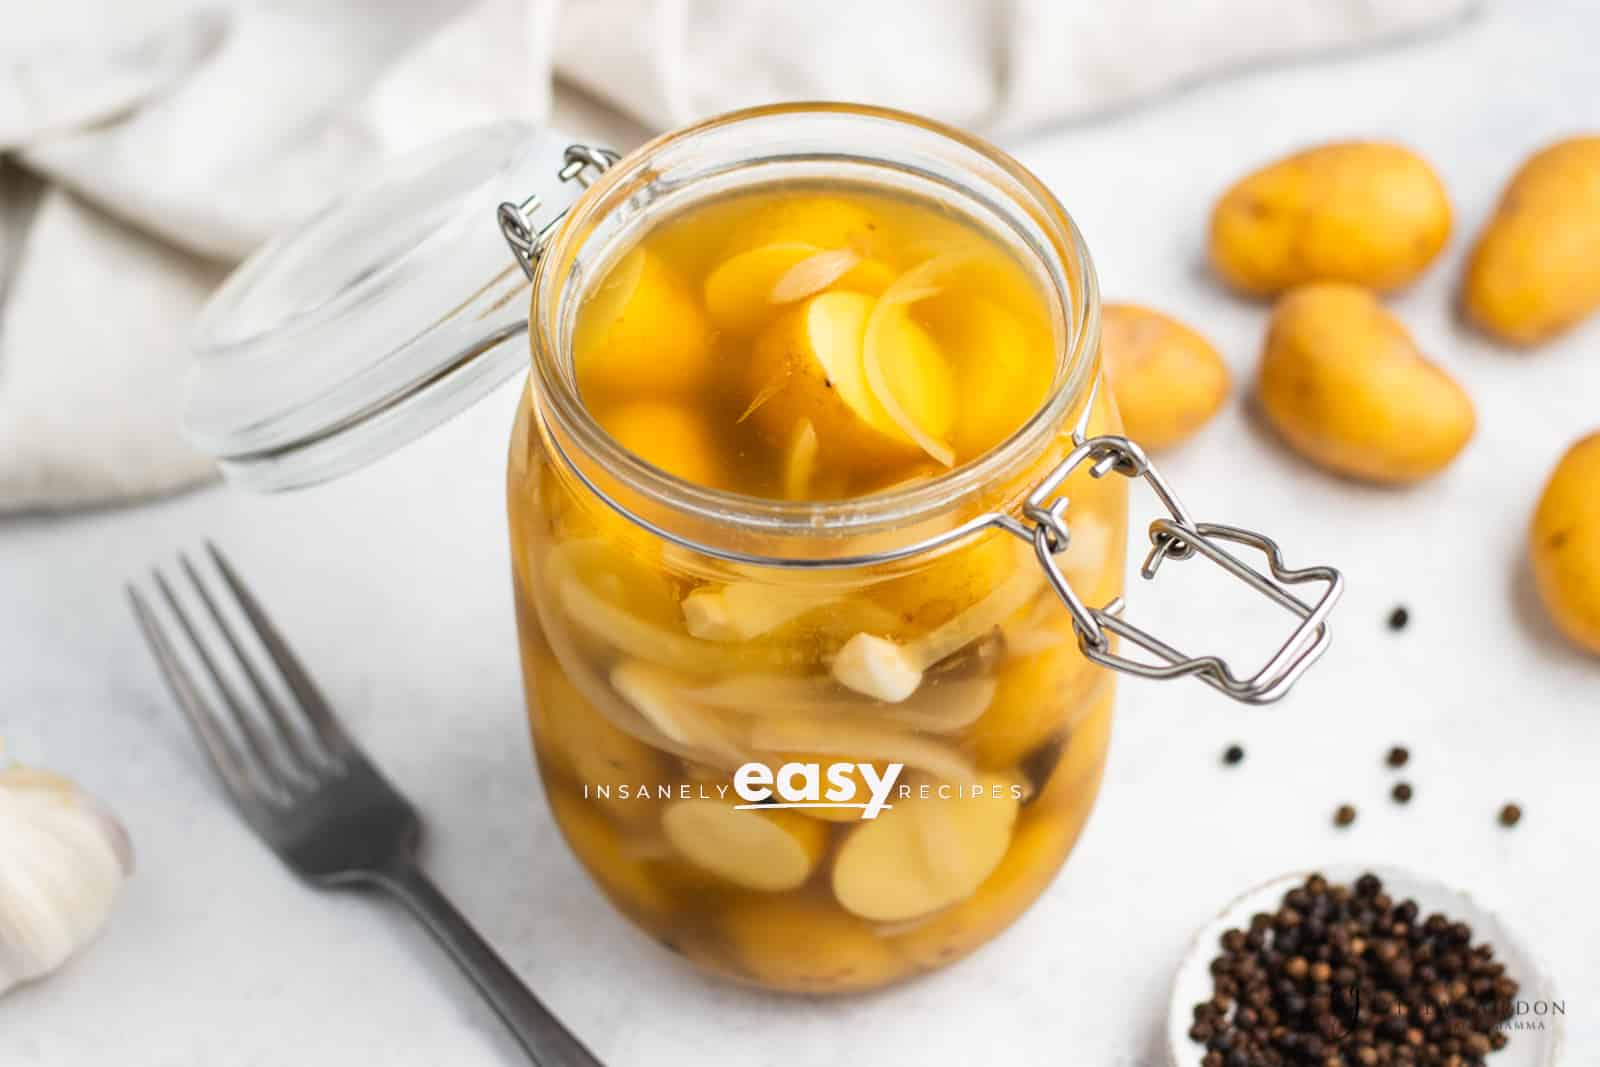 clear glass jar with yellow baby round potatoes cut in half with thin white onion slices in milky liquid.